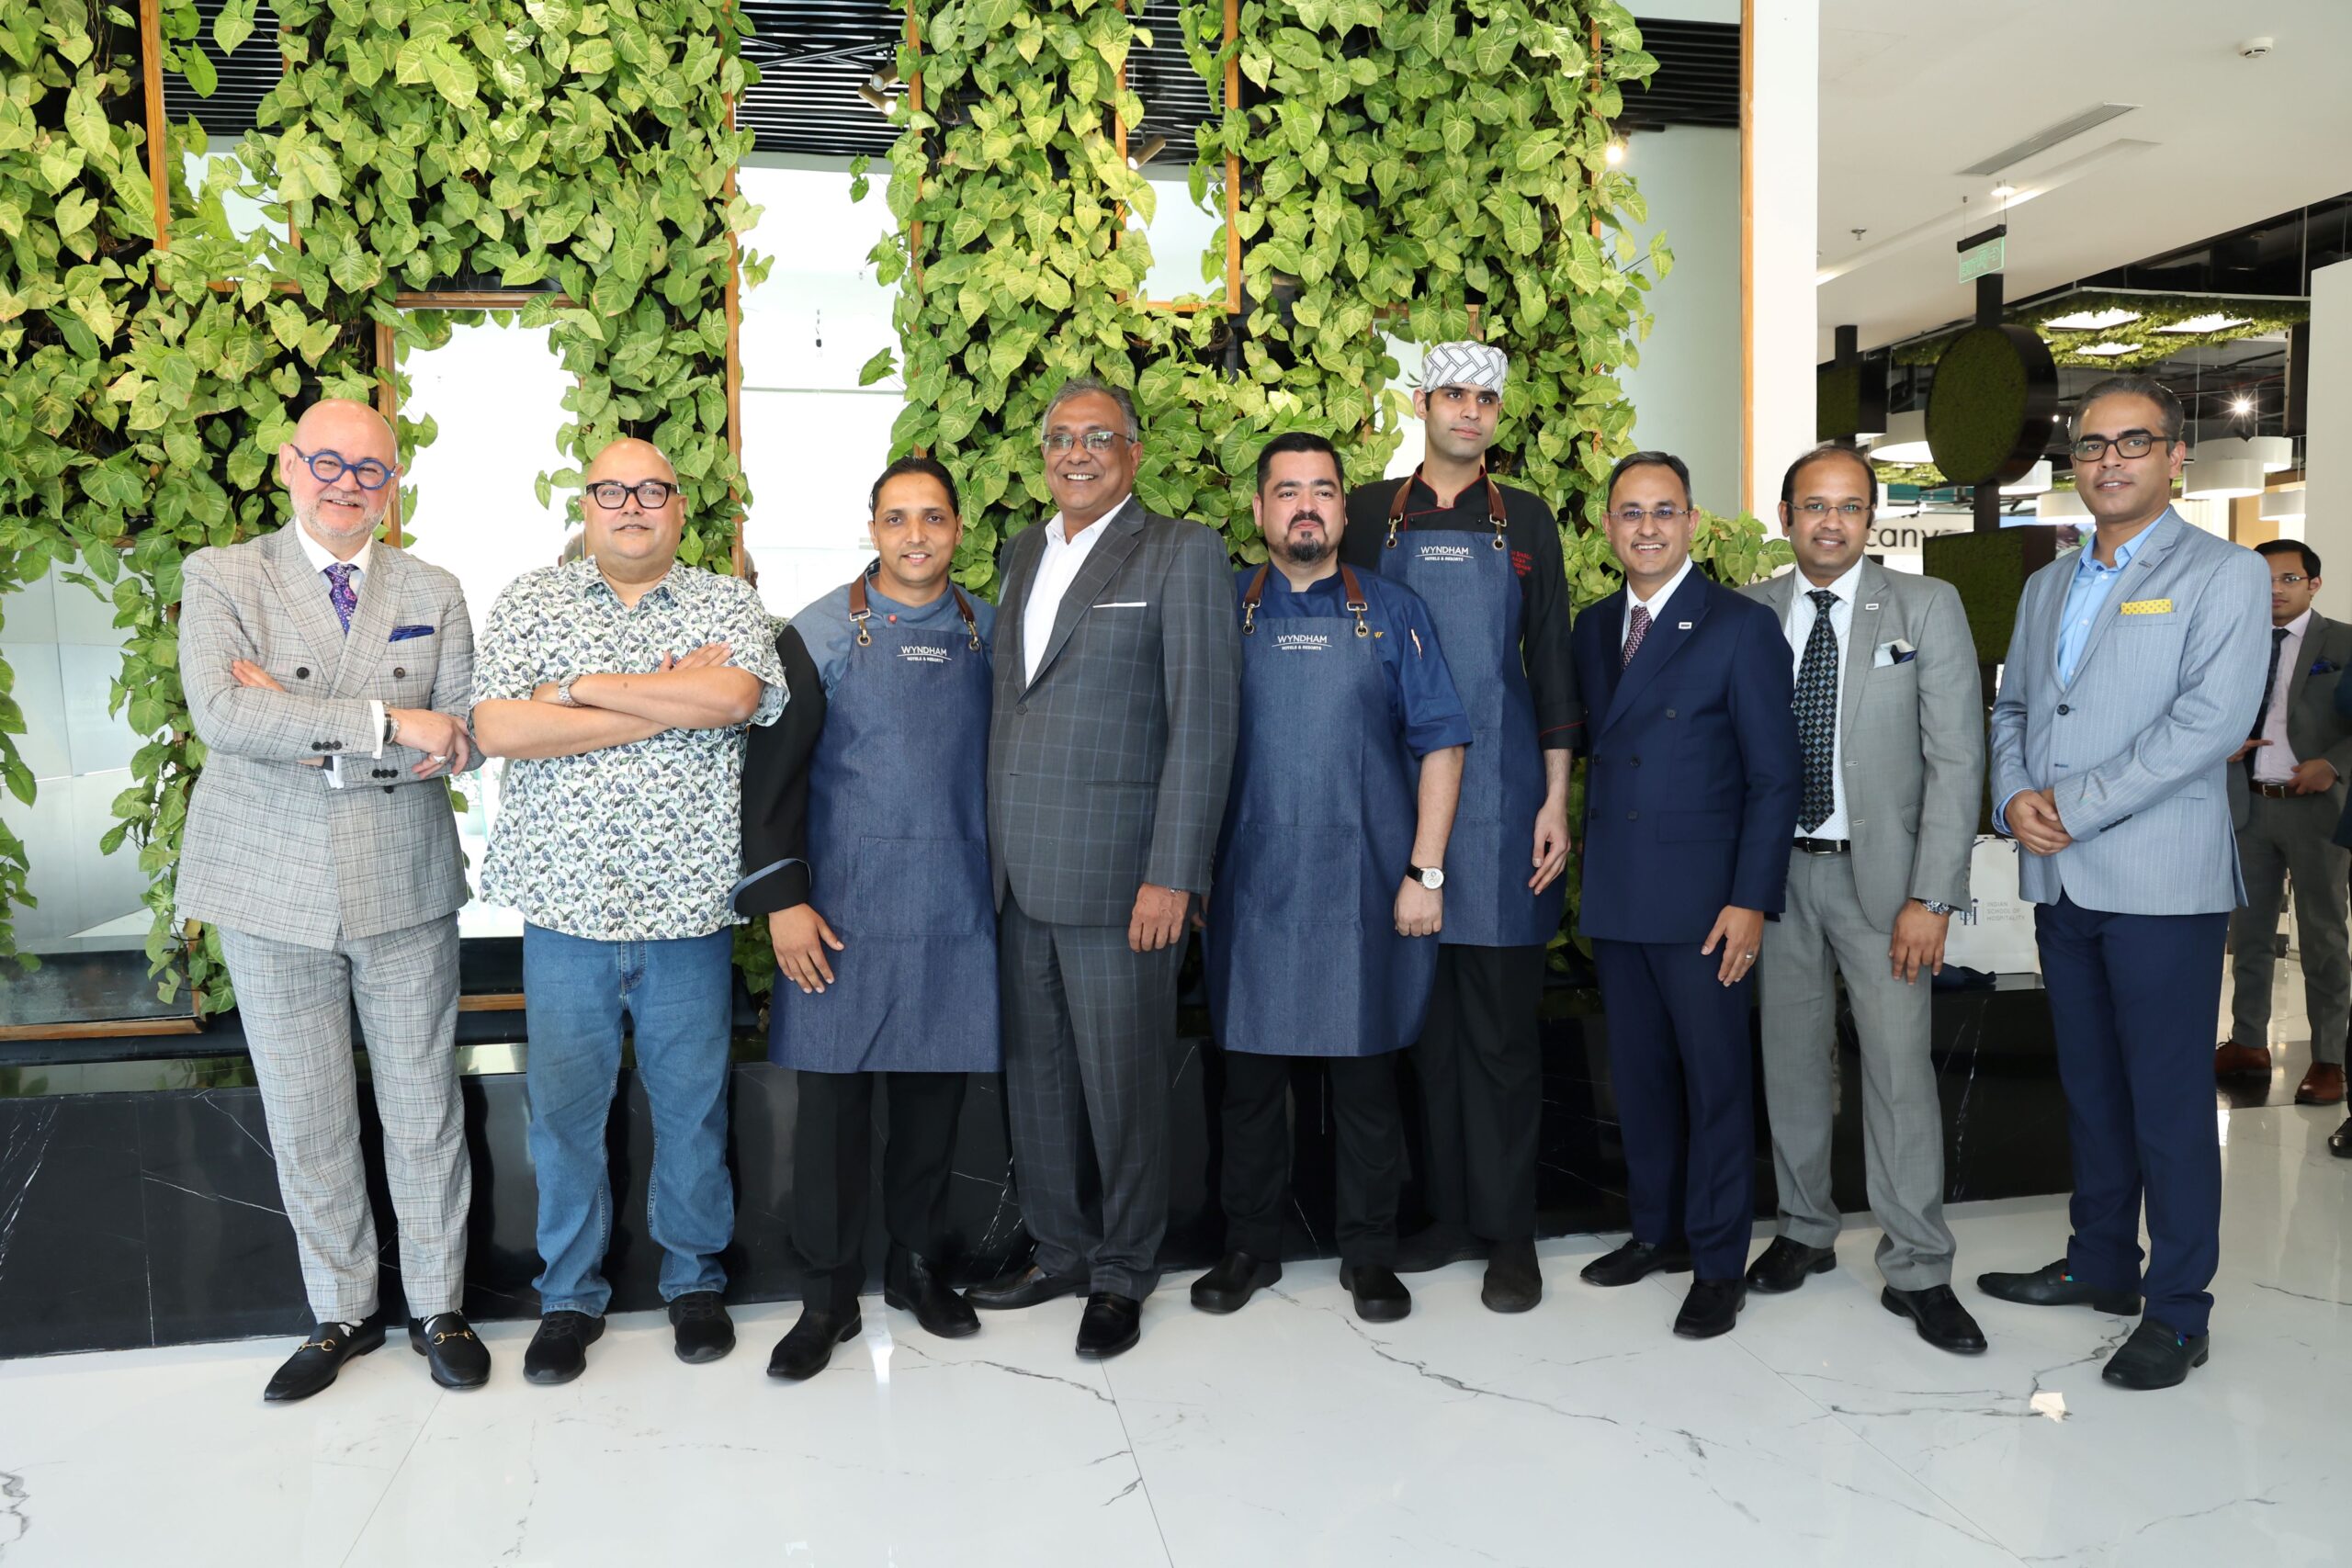 Wyndham Hotels & Resorts Hosts Competition to Find Innovative Chefs to Join Wyndham’s F&B Advisory Council in Eurasia